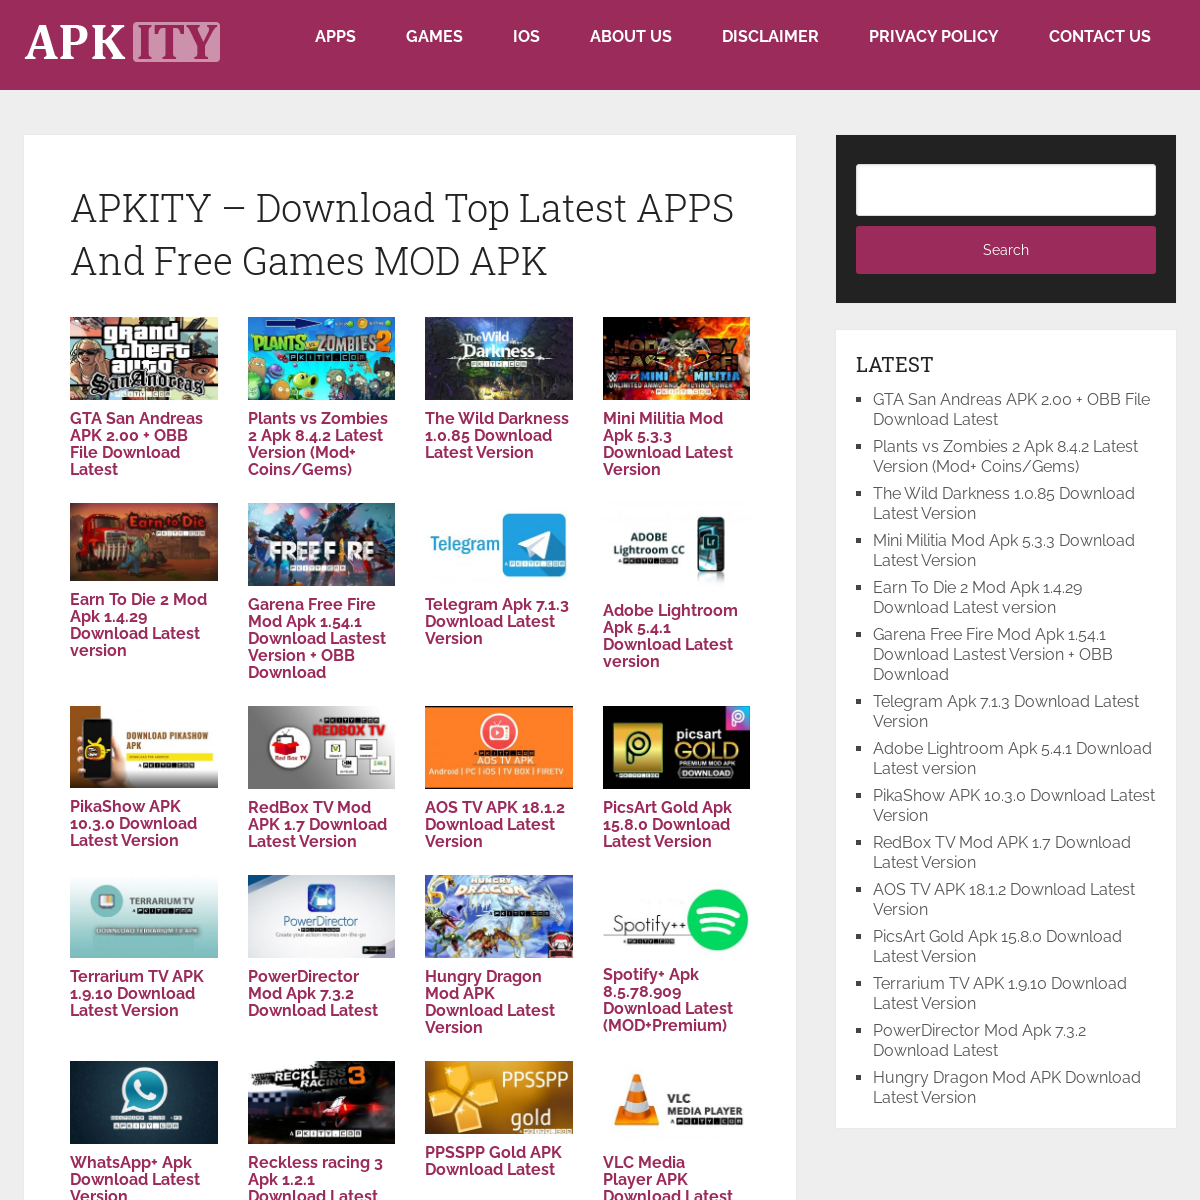 A complete backup of apkity.com